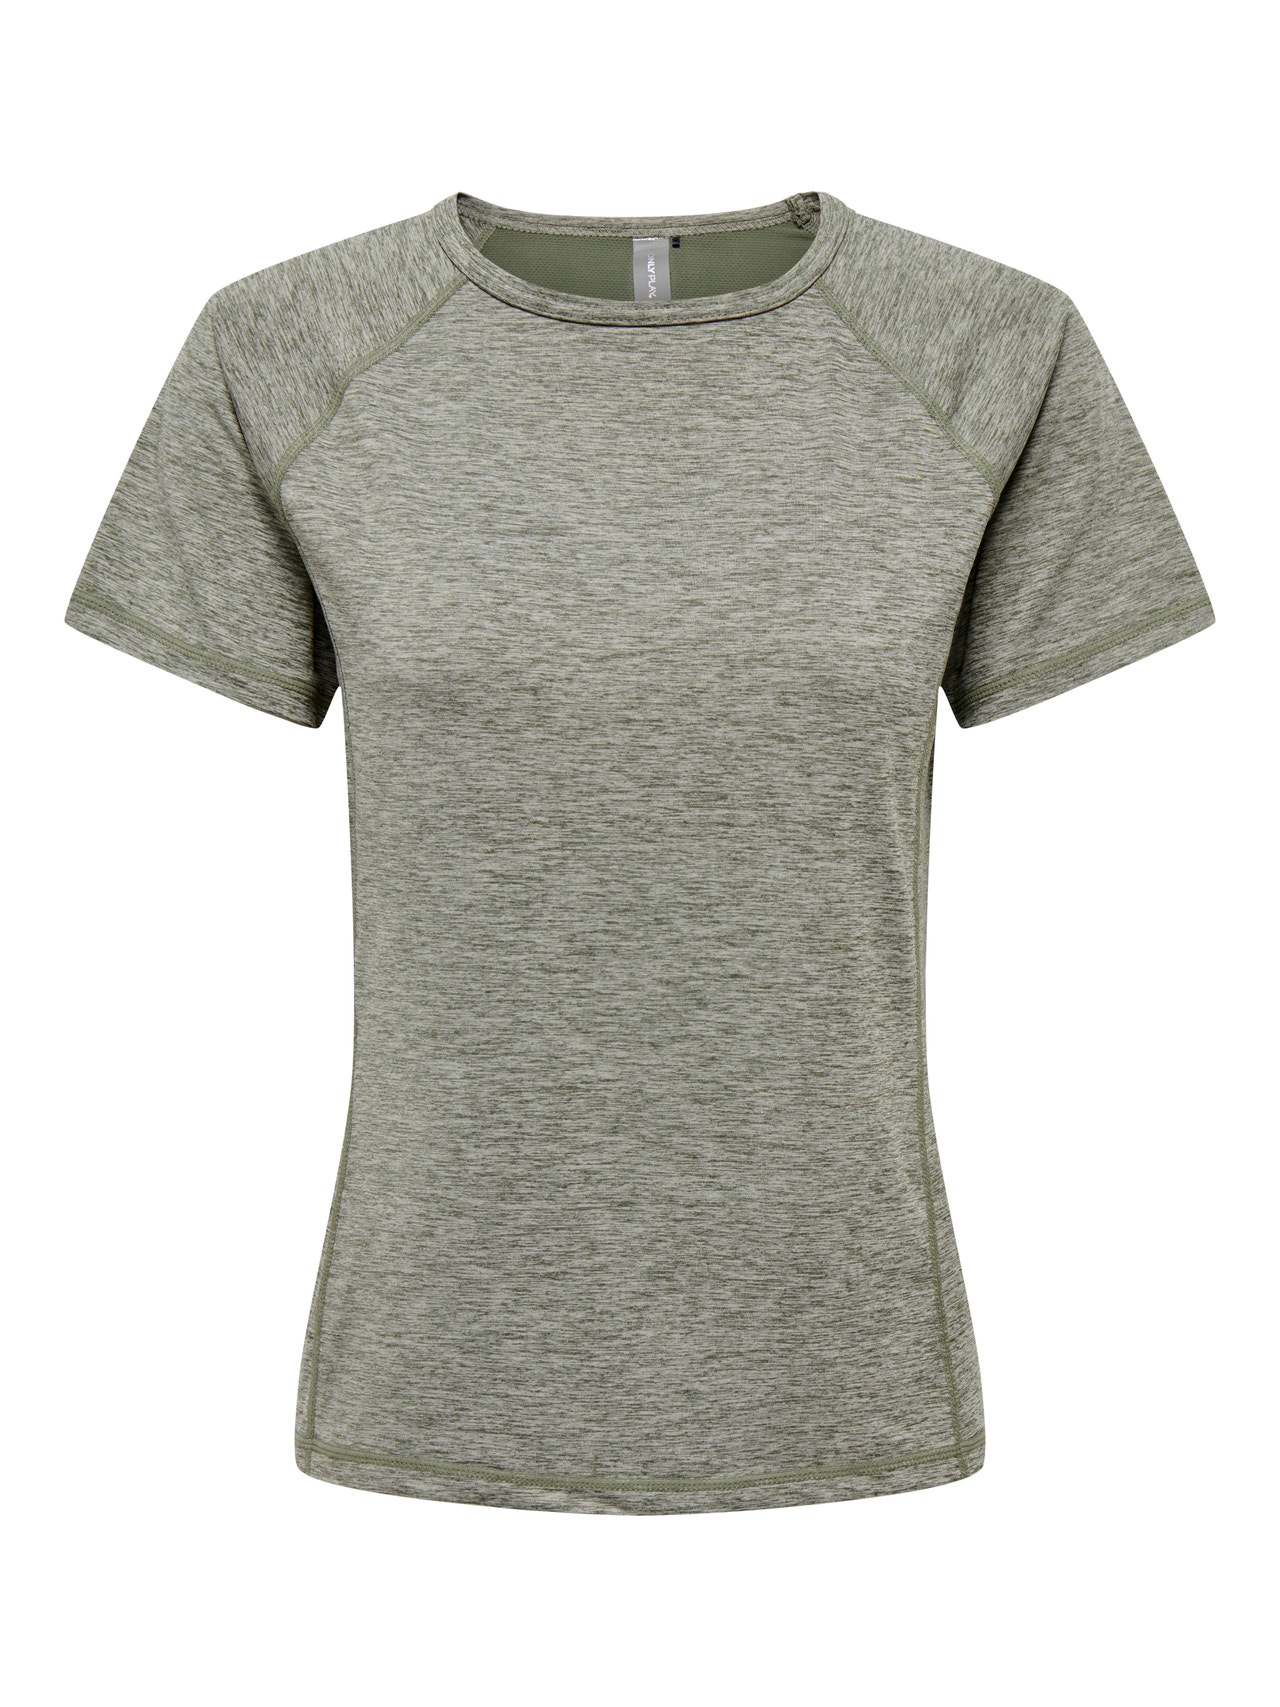 ONLY Regular Fit Round Neck T-Shirt -Dusty Olive - 15295068